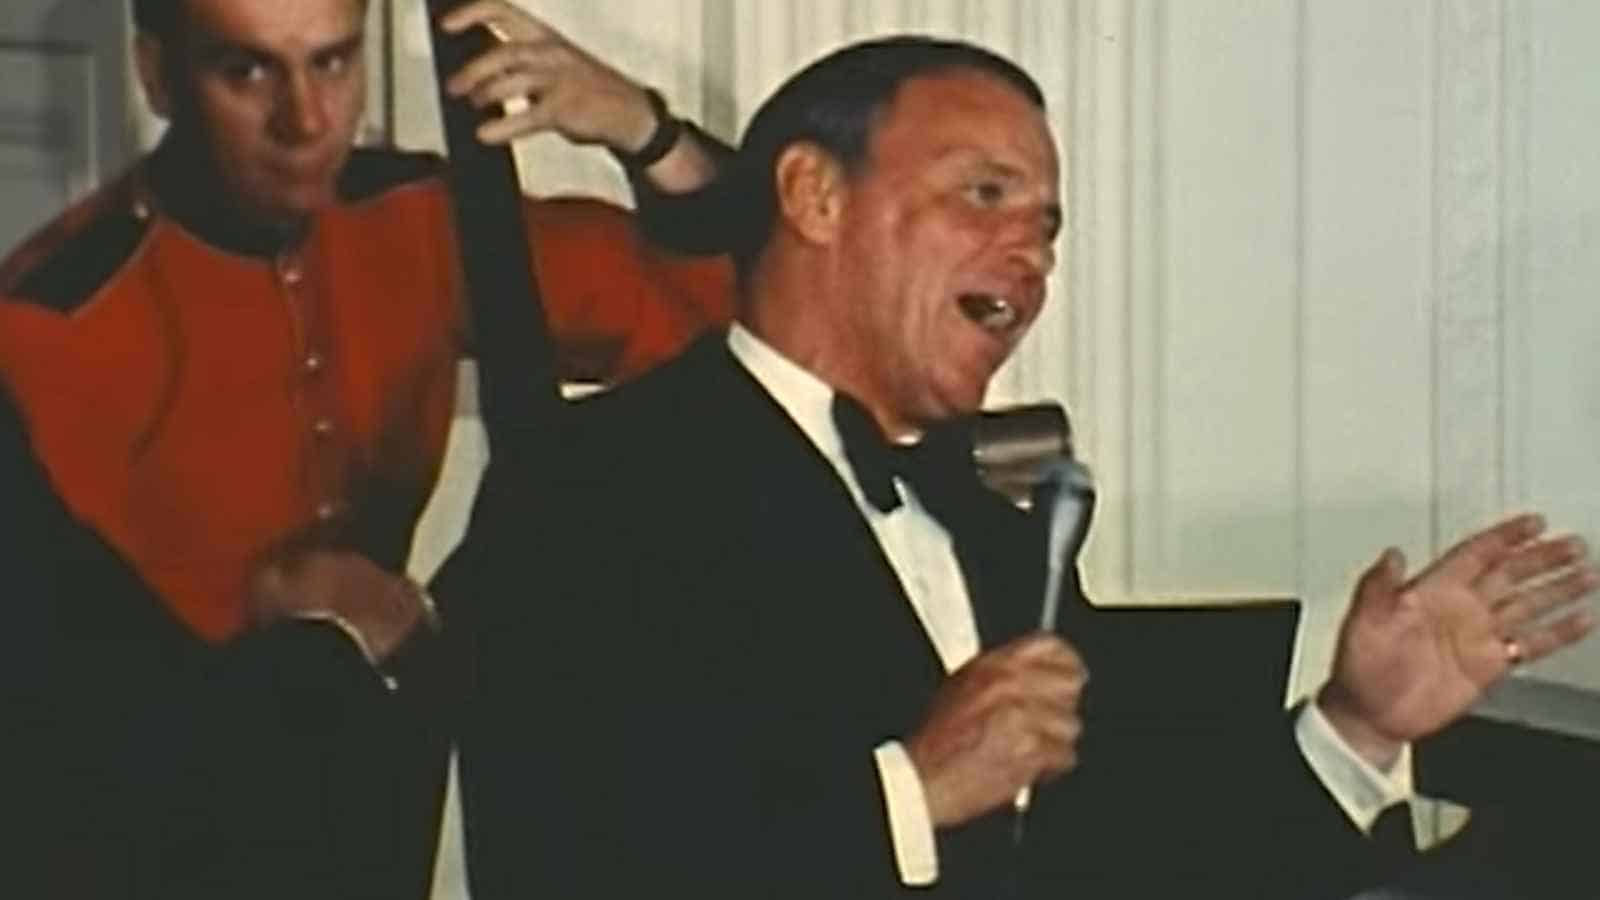 <p>This classic love song has been covered by many artists, but the version by Frank Sinatra remains a fan favorite. The lyrics perfectly describe the feeling of being in love with someone’s appearance. This song is an elegant and romantic choice for any occasion.</p>